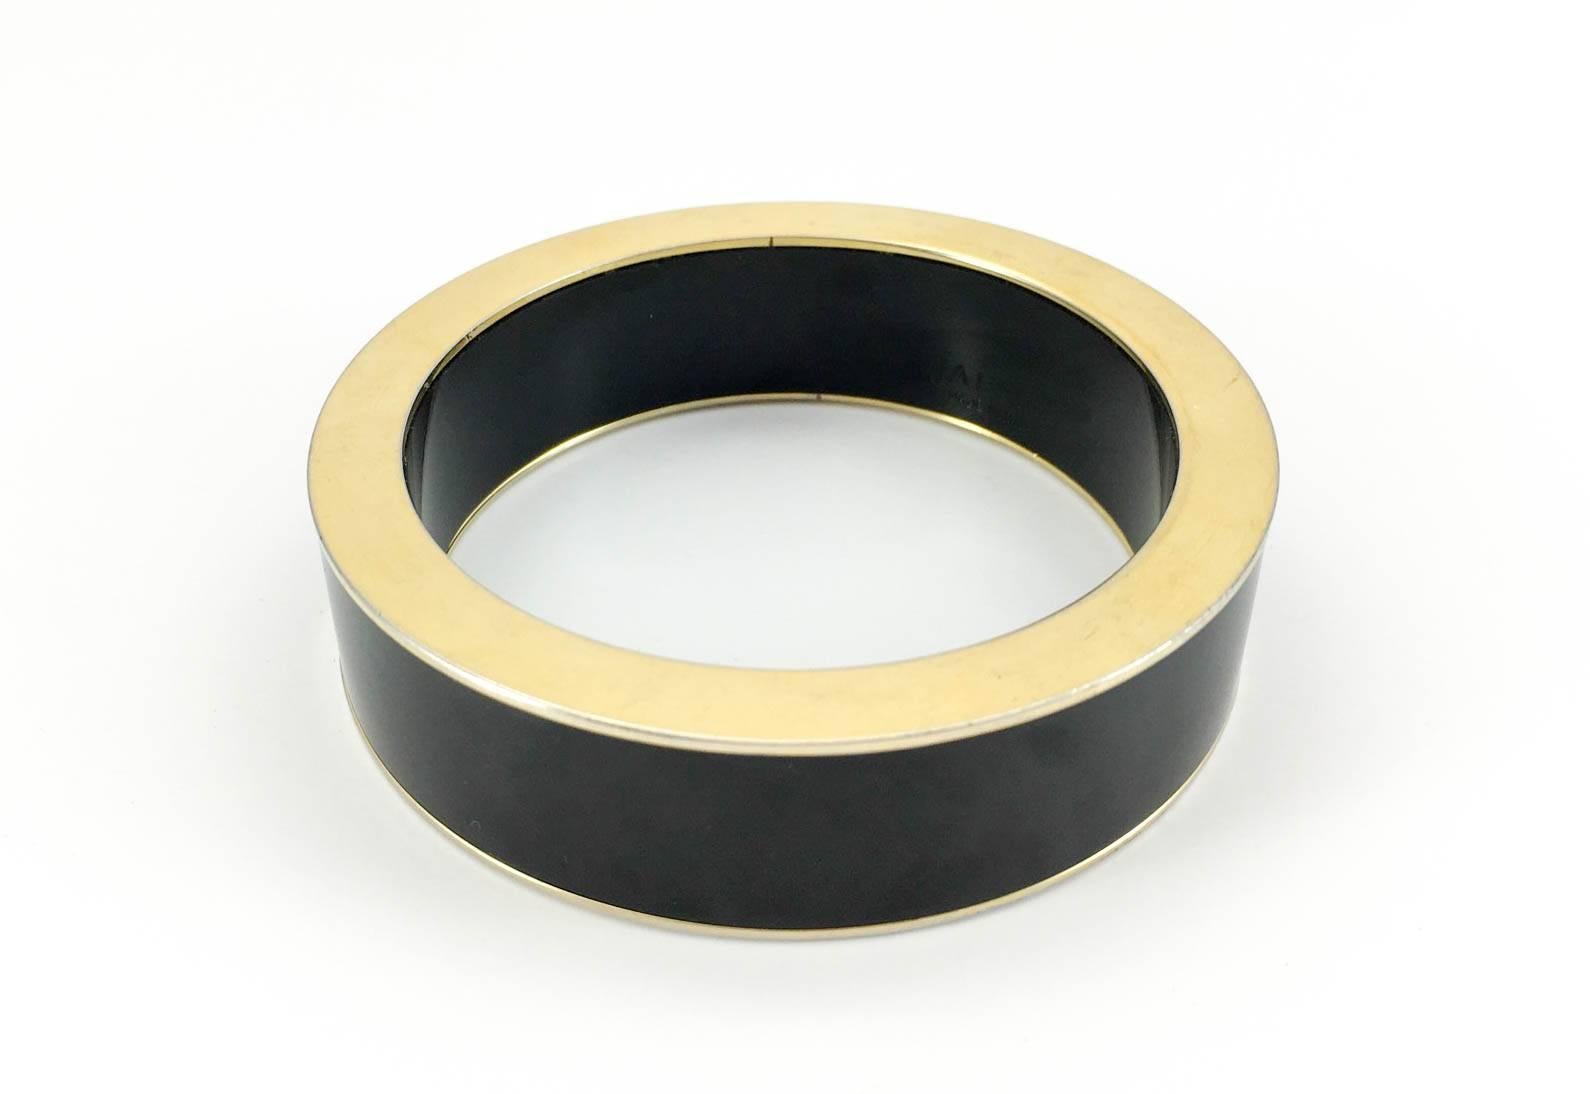 Jaeger black and gold-tone bangle. Stylish bangle and plastic and gilt metal by Jaeger. Signed on the inside. Made in Italy

Label / Designer: Jaeger
Period: 21st Century
Origin: Italy
Materials: Plastic; Gilt Metal
Condition: Good 

RETURN